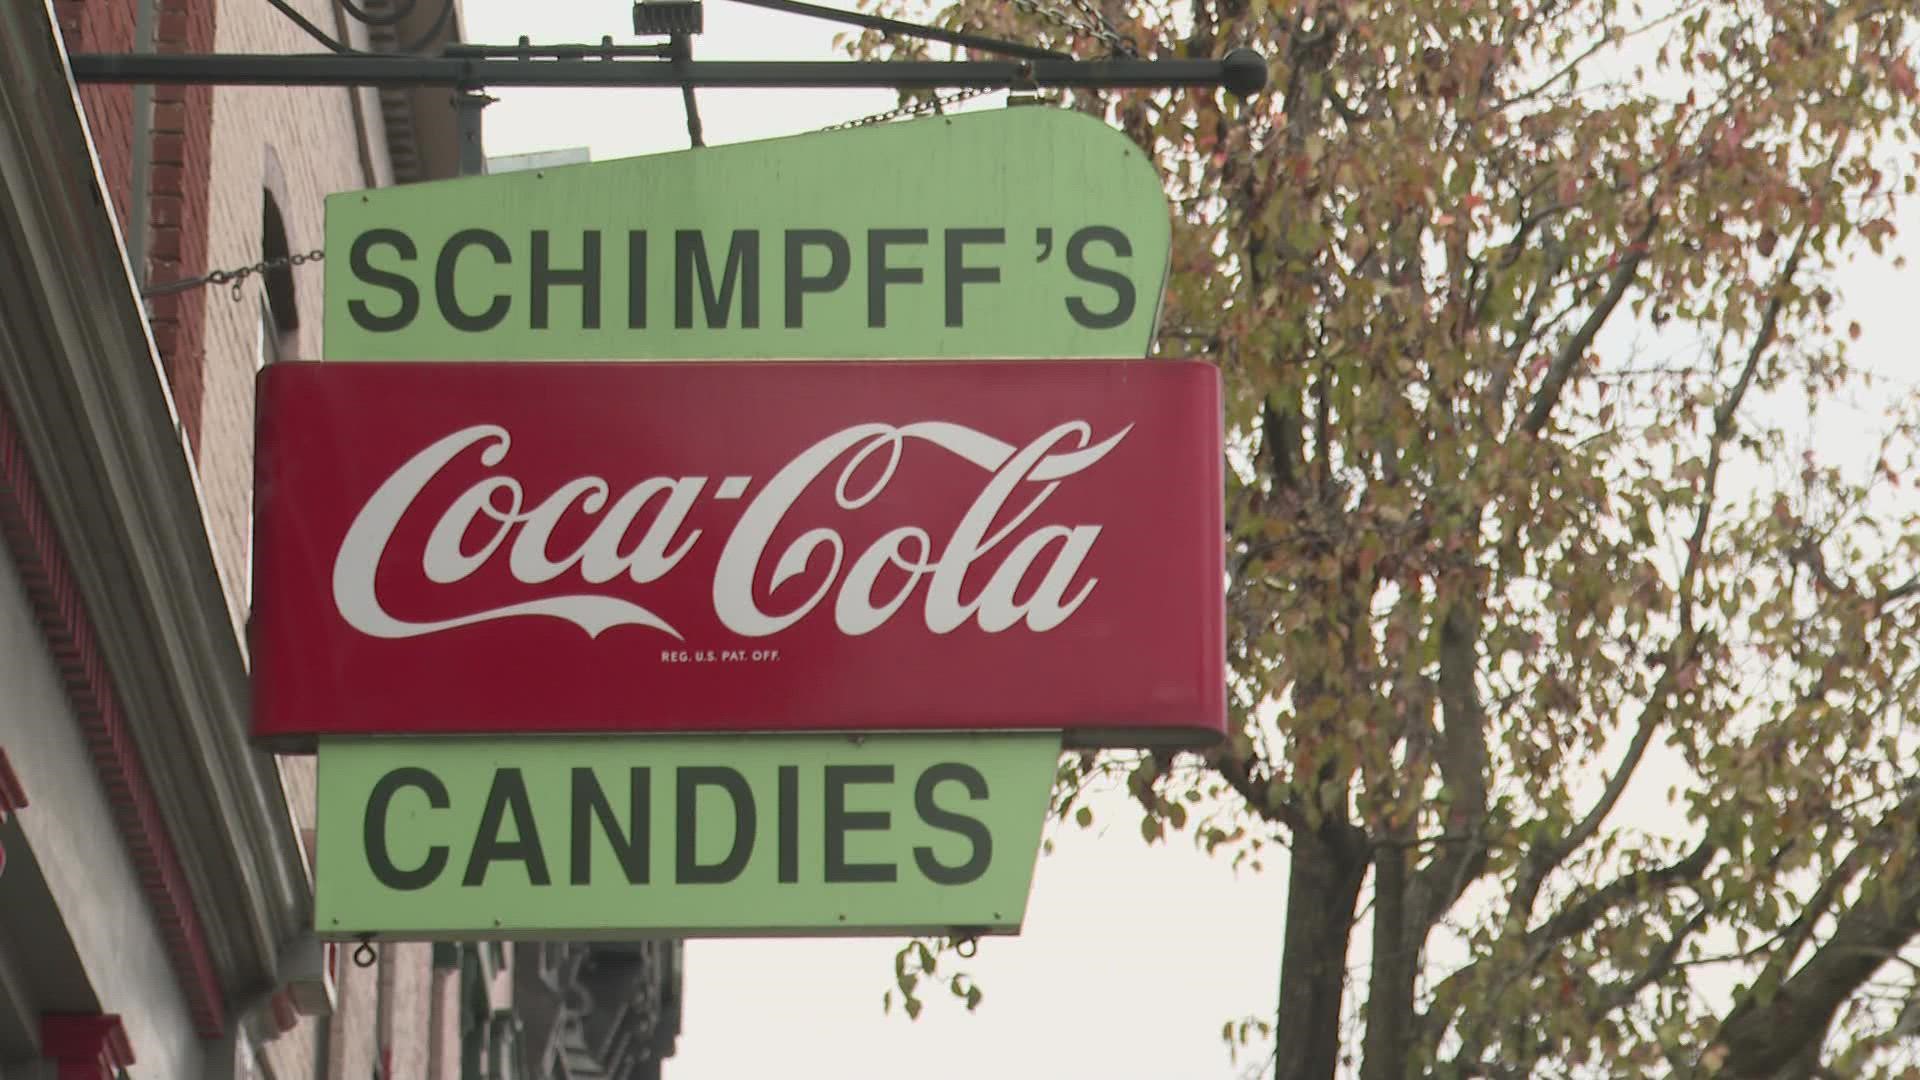 Schimpff's has served homemade candy since the 1890s and remains to be one of Jeffersonville's favorite treasures.